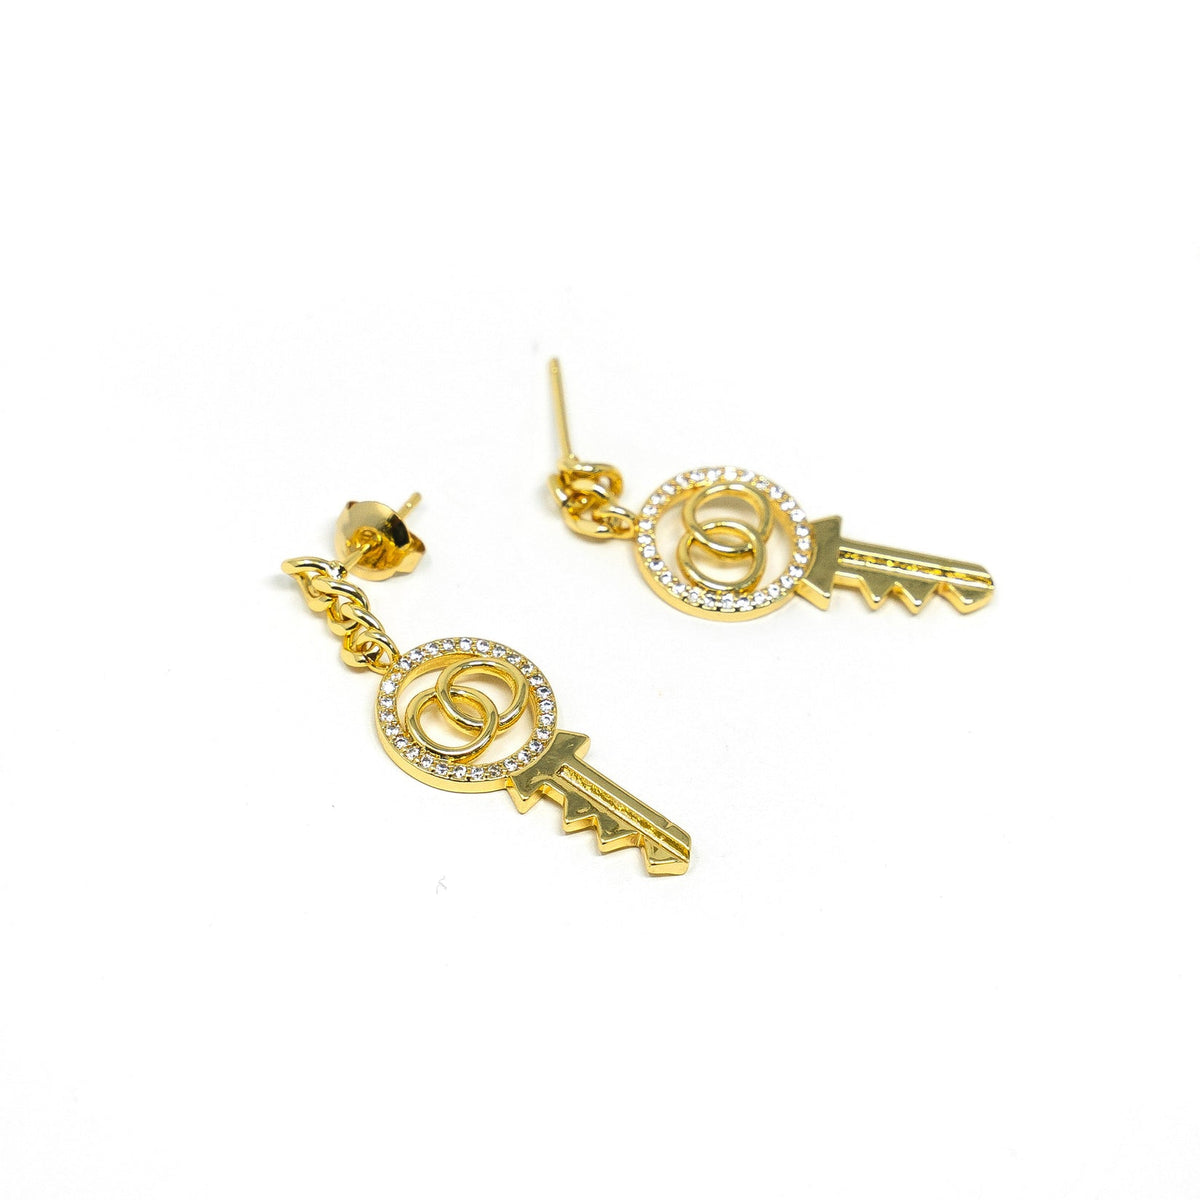 Gold and Crystal Key Earrings